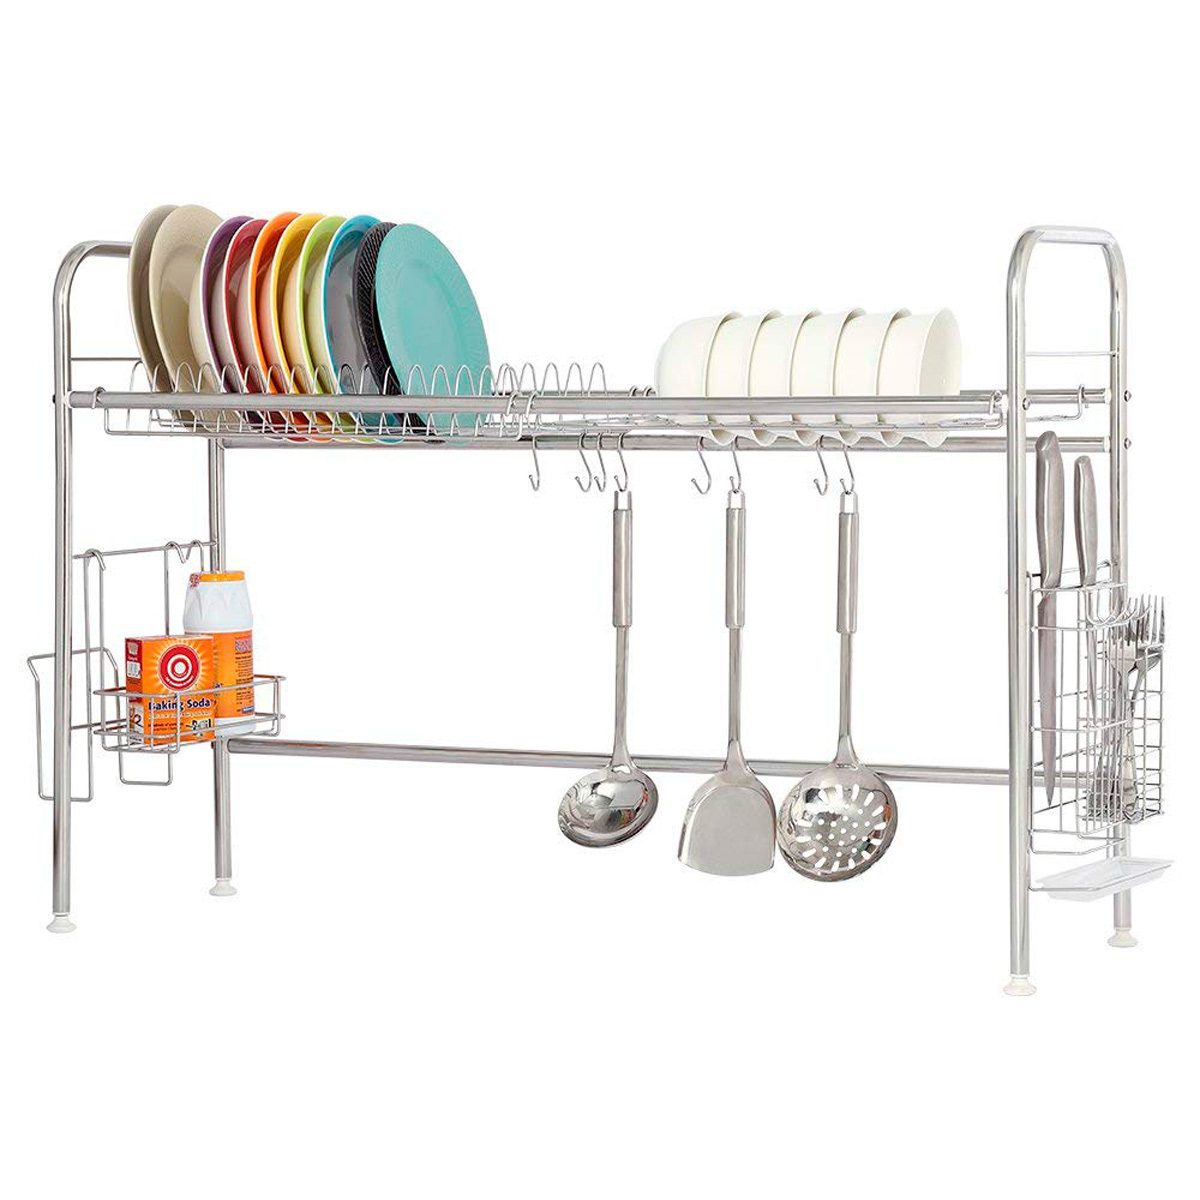 Here's the Dish Rack I Can't Live Without